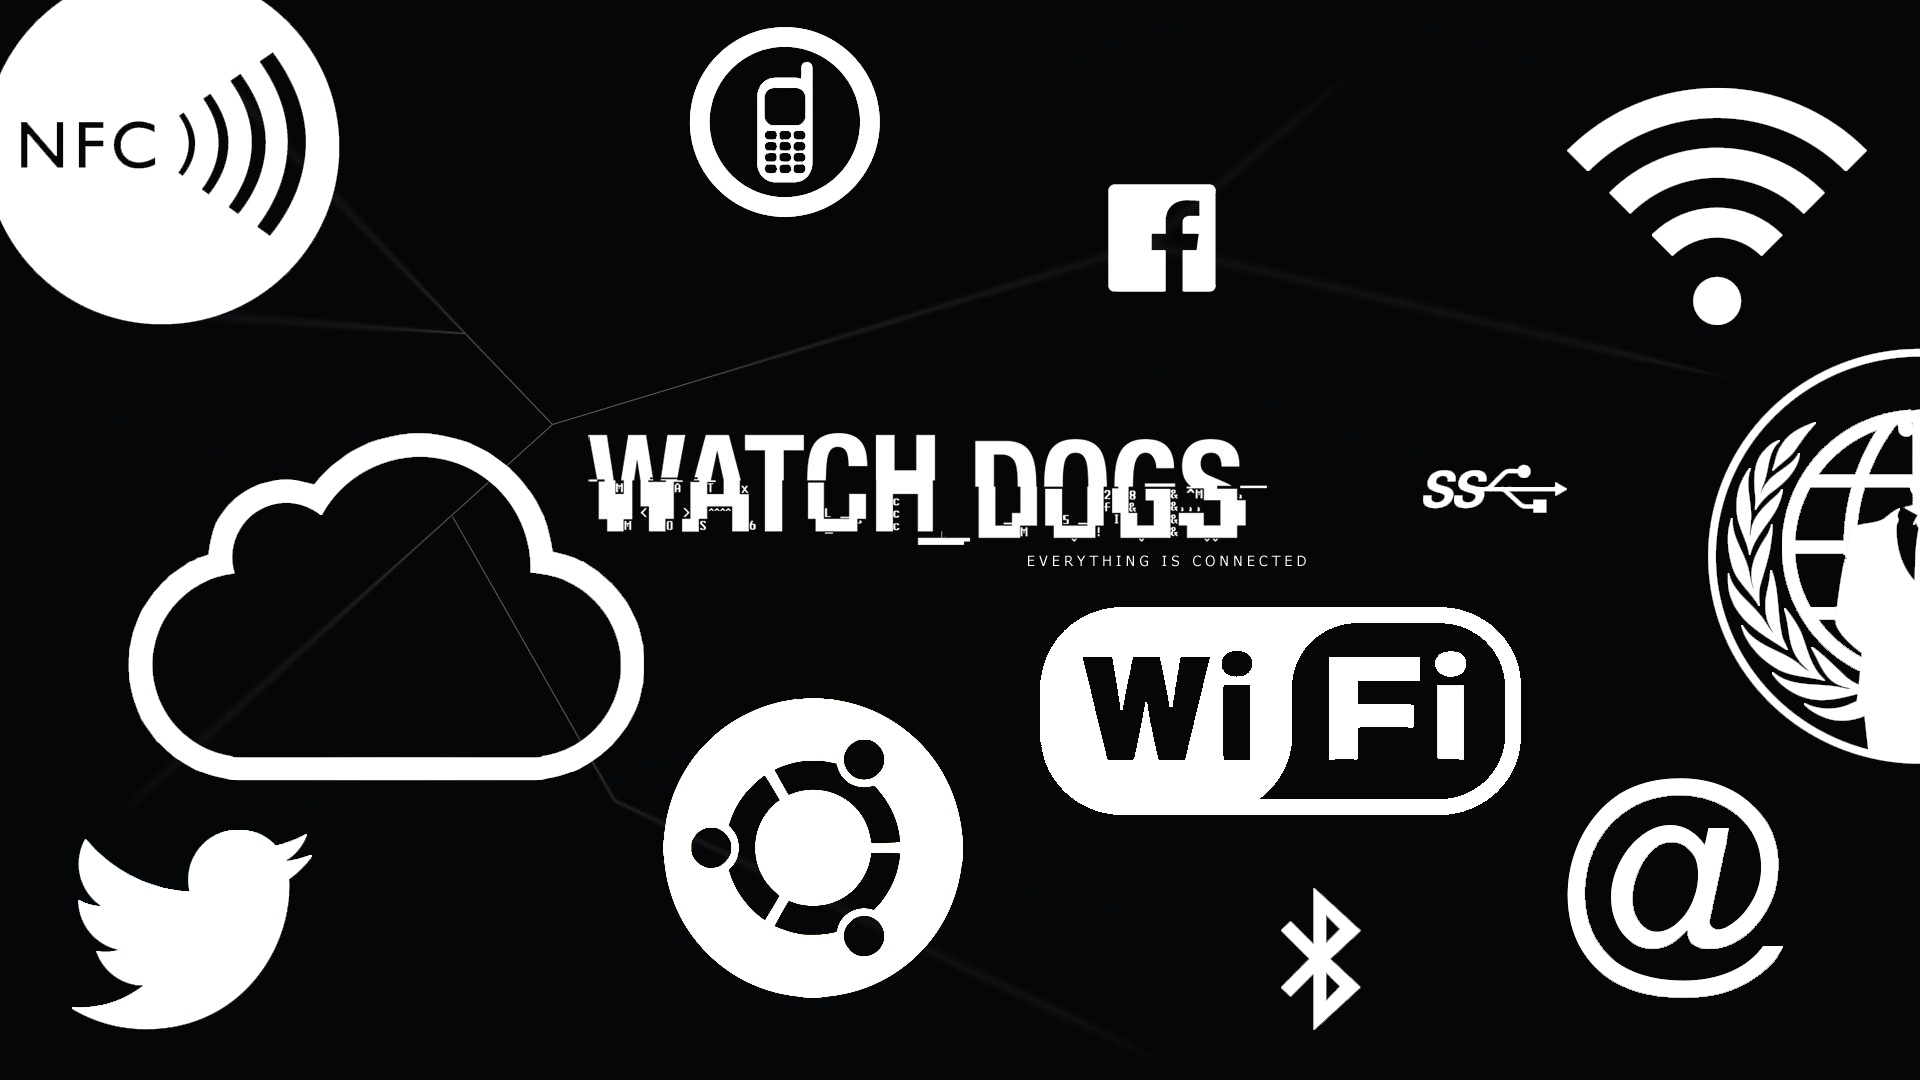 watch dogs 2 wallpaper dedsec WATCHDOGS 2  Dedsec  Watch dogs art  Watch dogs Graphic poster